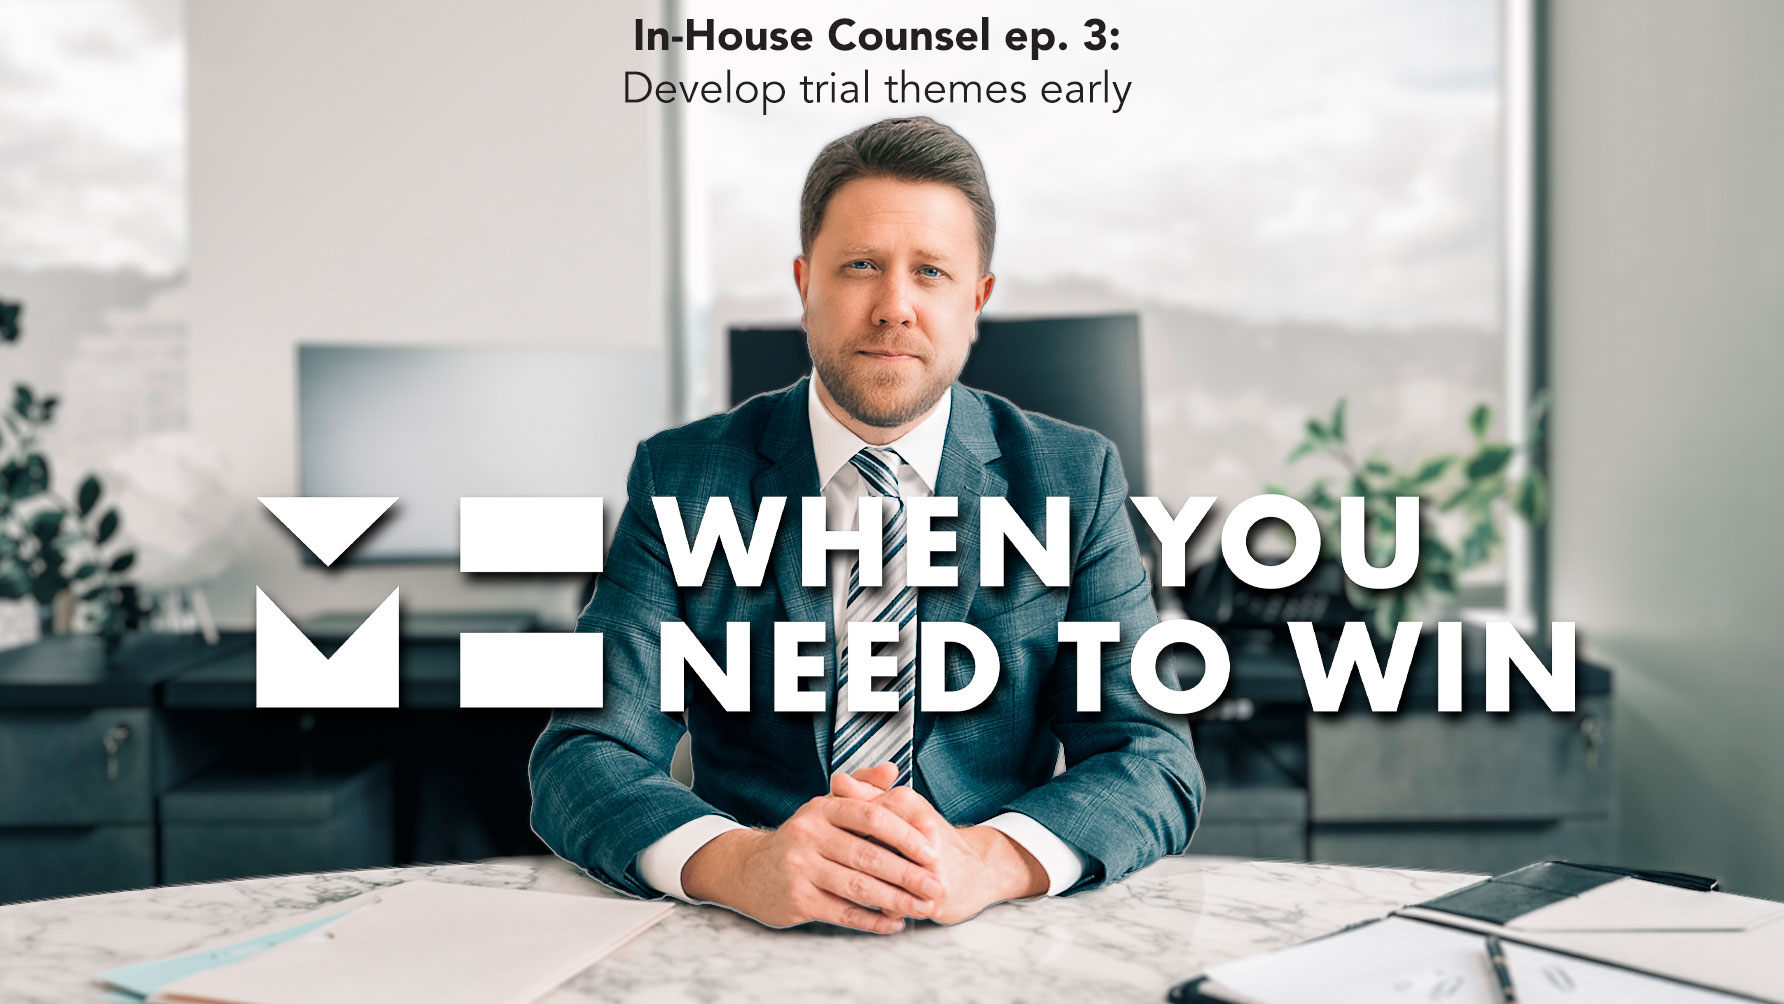 When You Need to Win - In-House Counsel Edition - Develop trial themes early